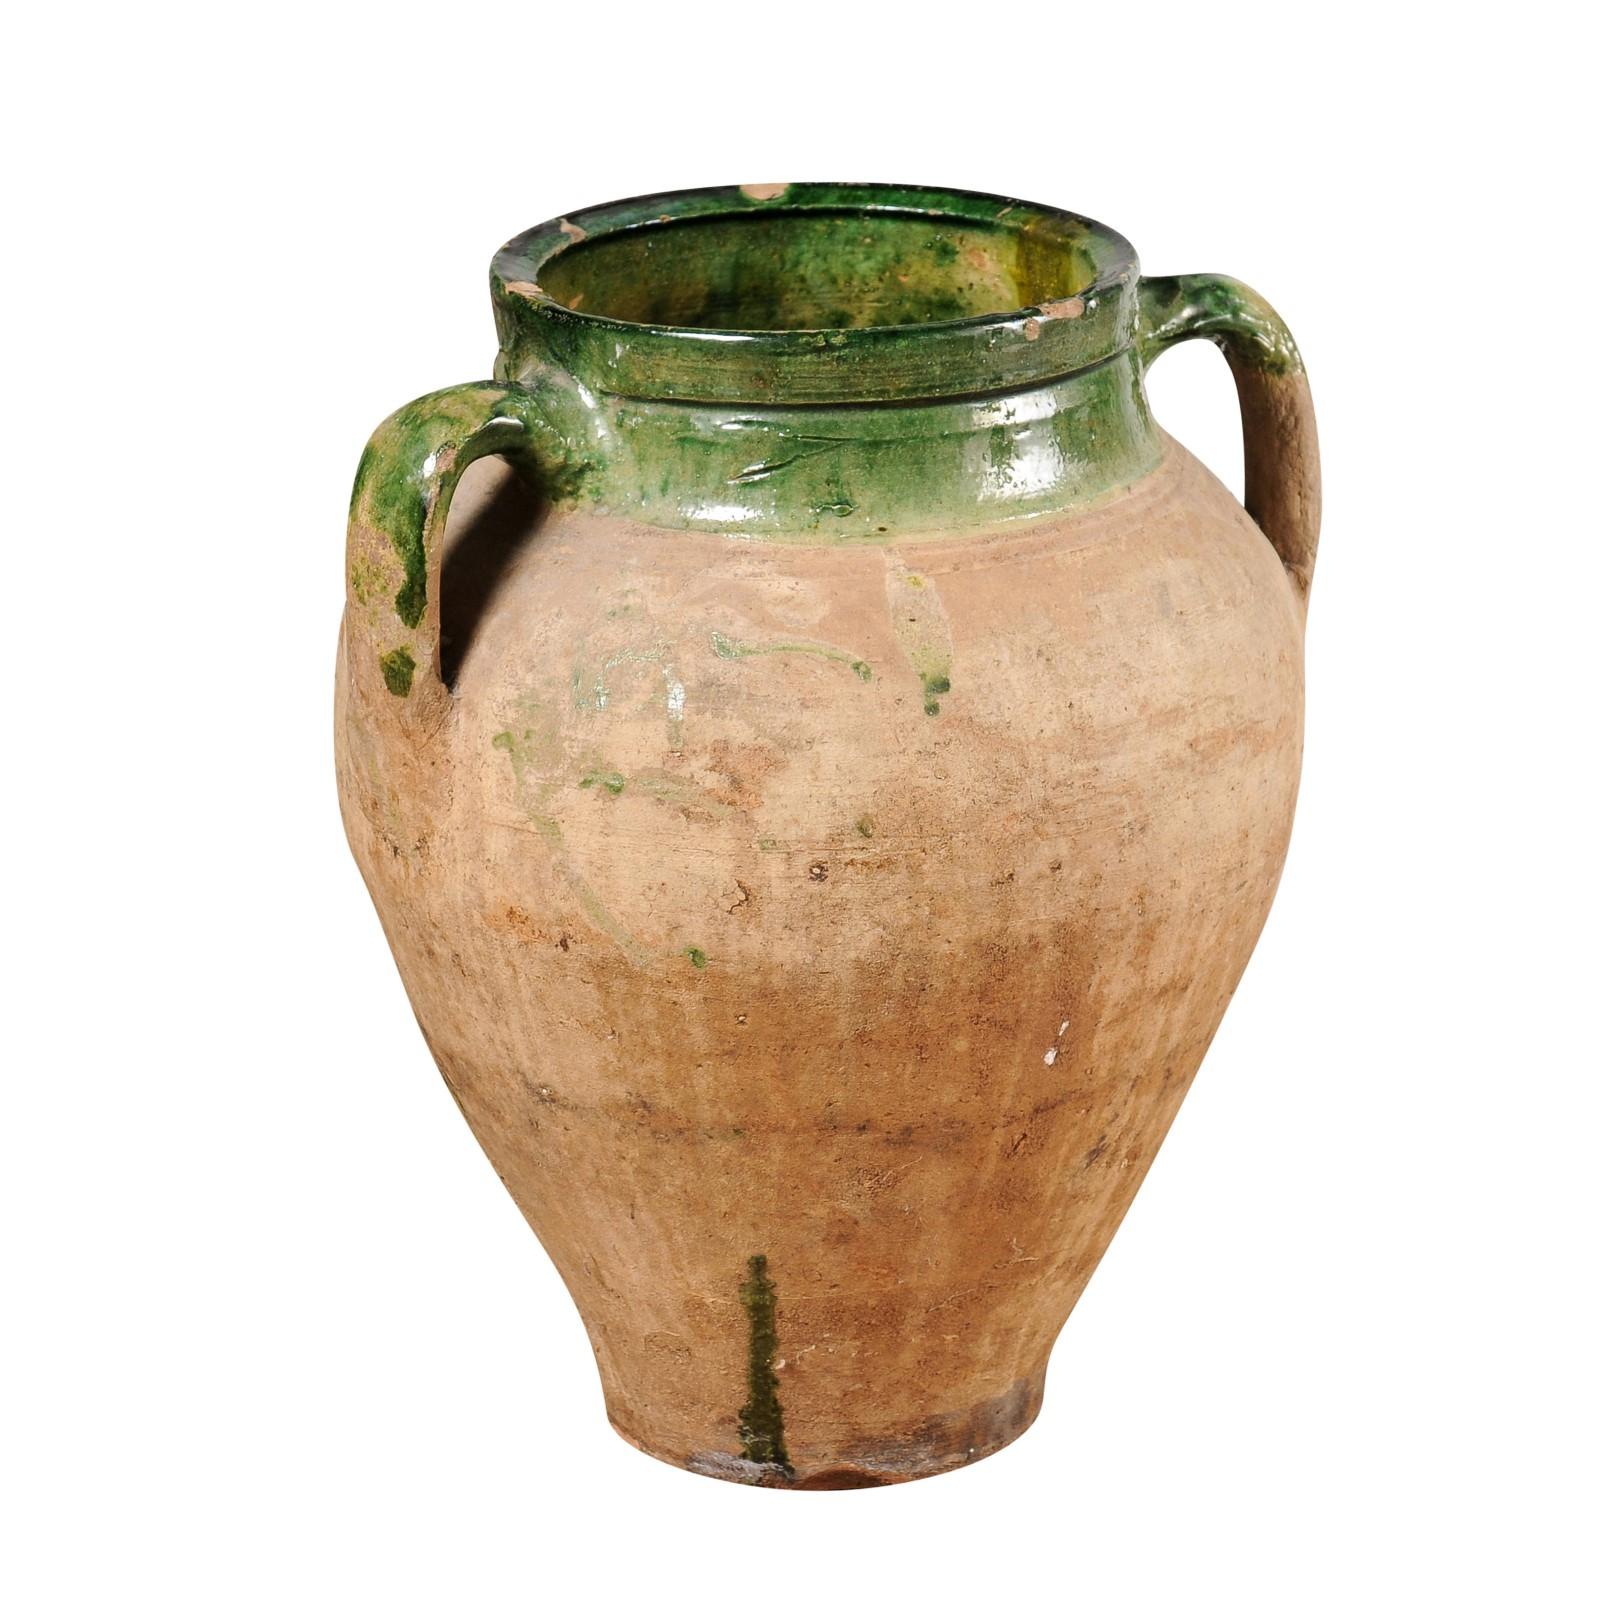 English Rustic 1930s Terracotta Olive Oil Jar Circa 1930 with Green Glazed Top For Sale